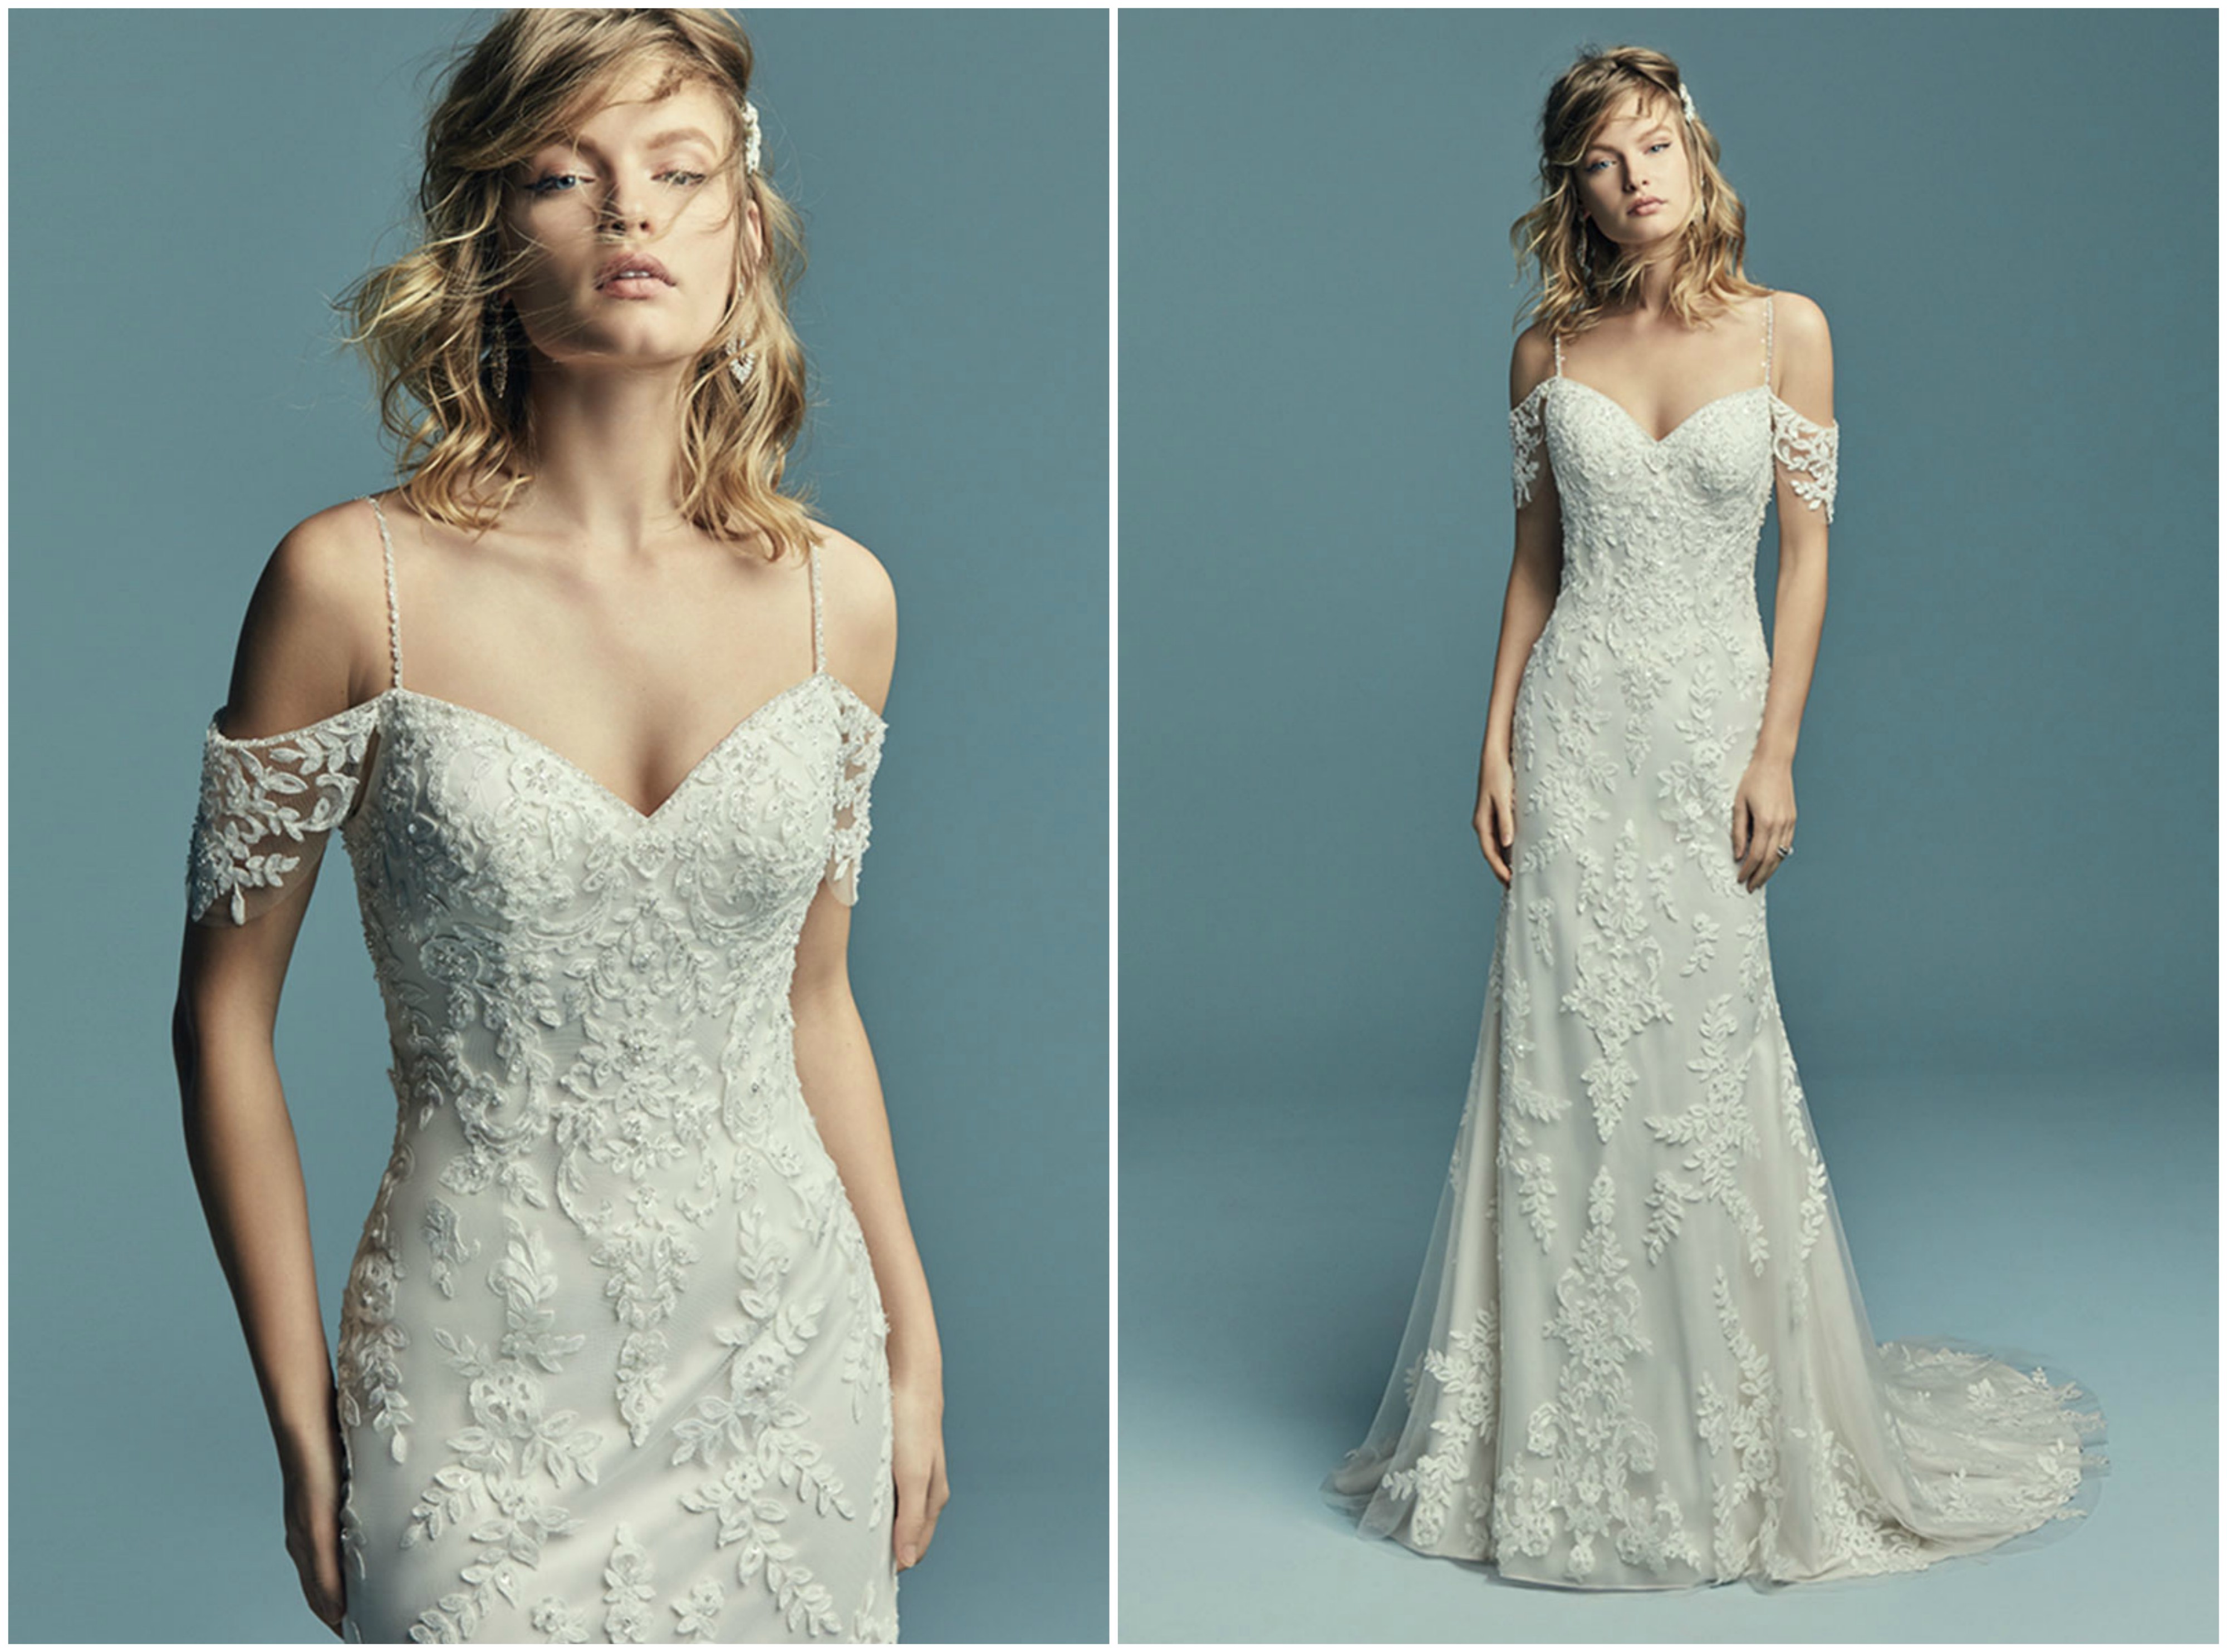 <a href="https://www.maggiesottero.com/maggie-sottero/angelica/11443" target="_blank">Maggie Sottero</a>